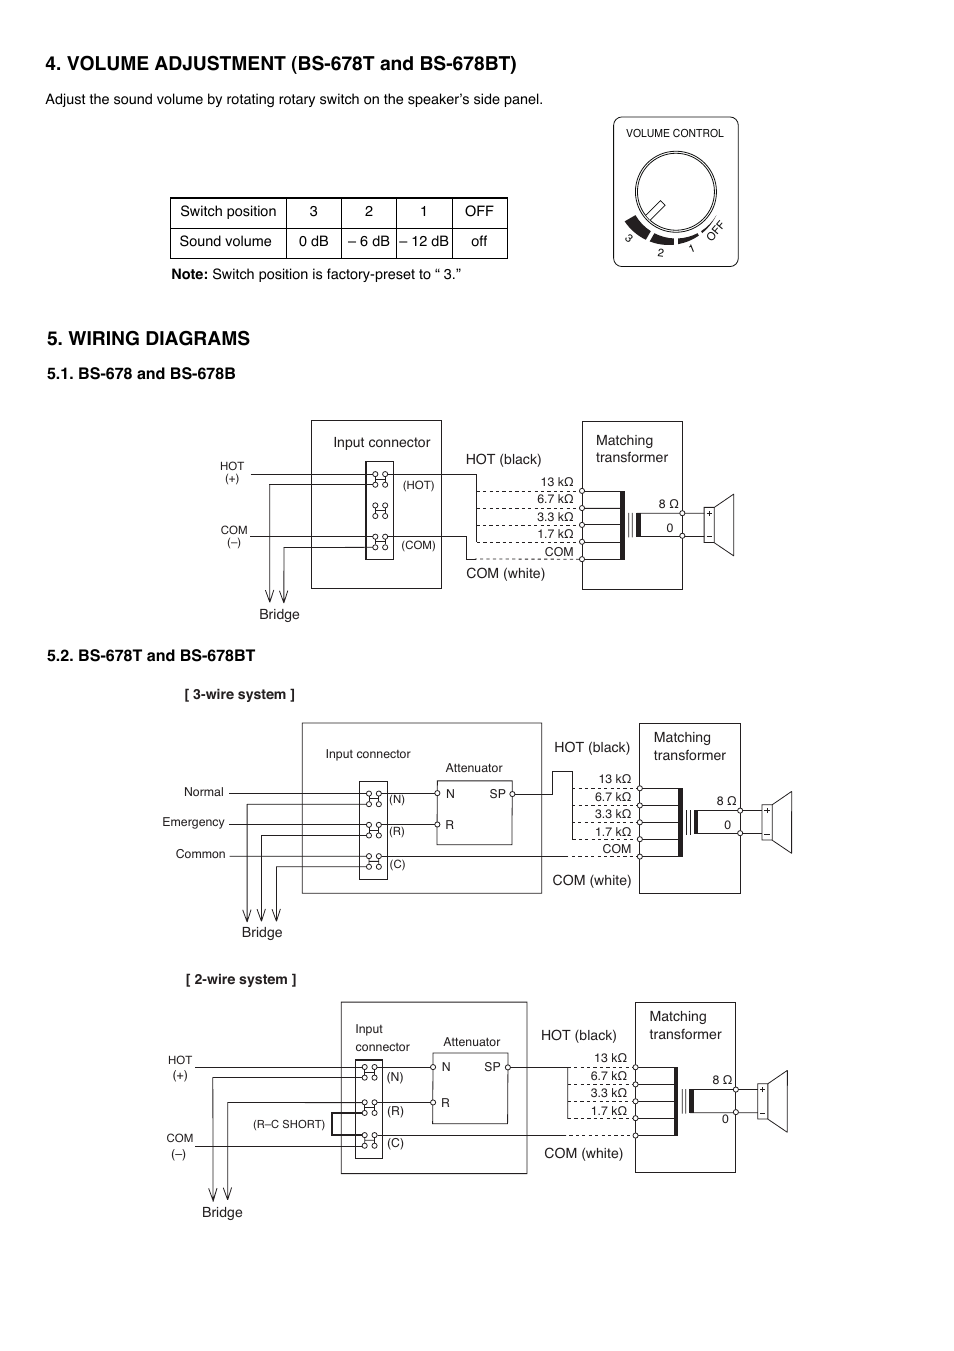 Wiring Diagrams Toa Bs 678bt User